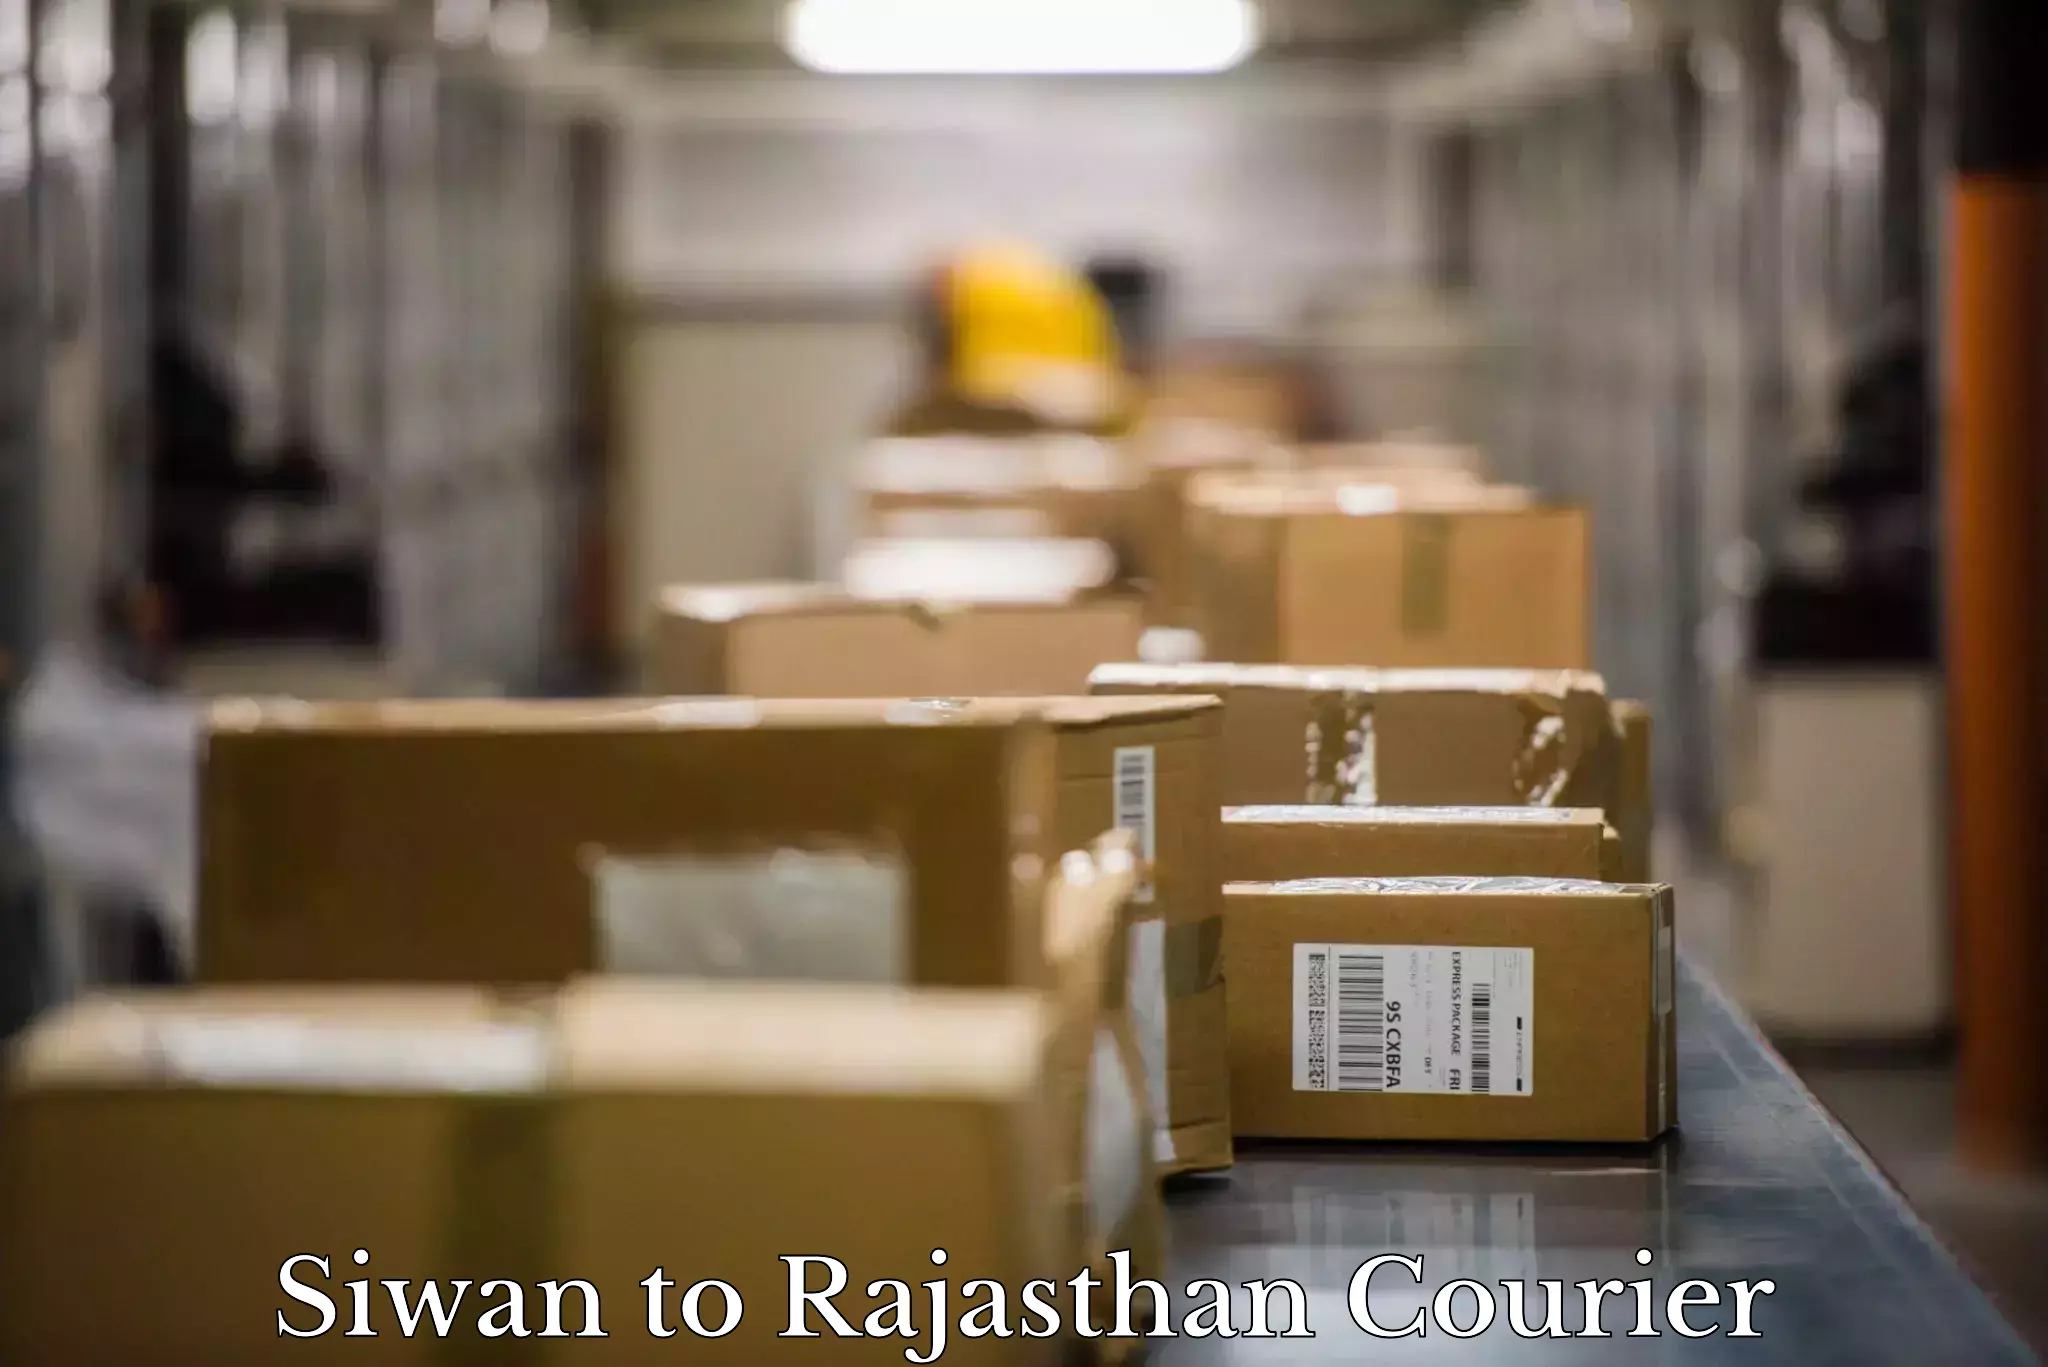 Professional furniture movers Siwan to Rajasthan